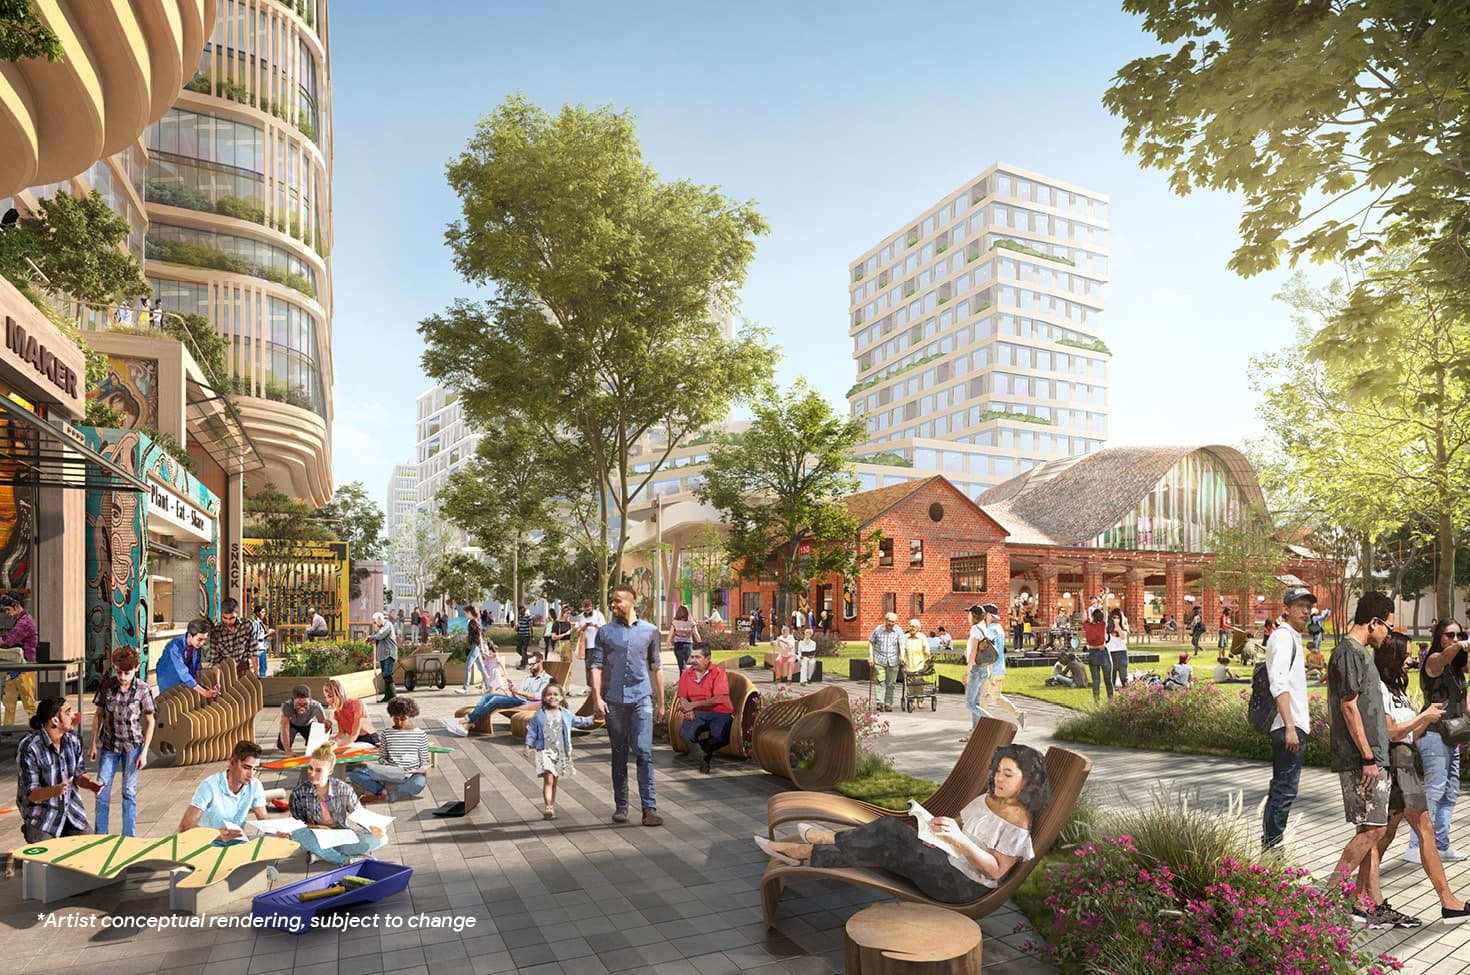 How Google Won Over Some of Its Biggest Critics to Build a Megacampus in San Jose